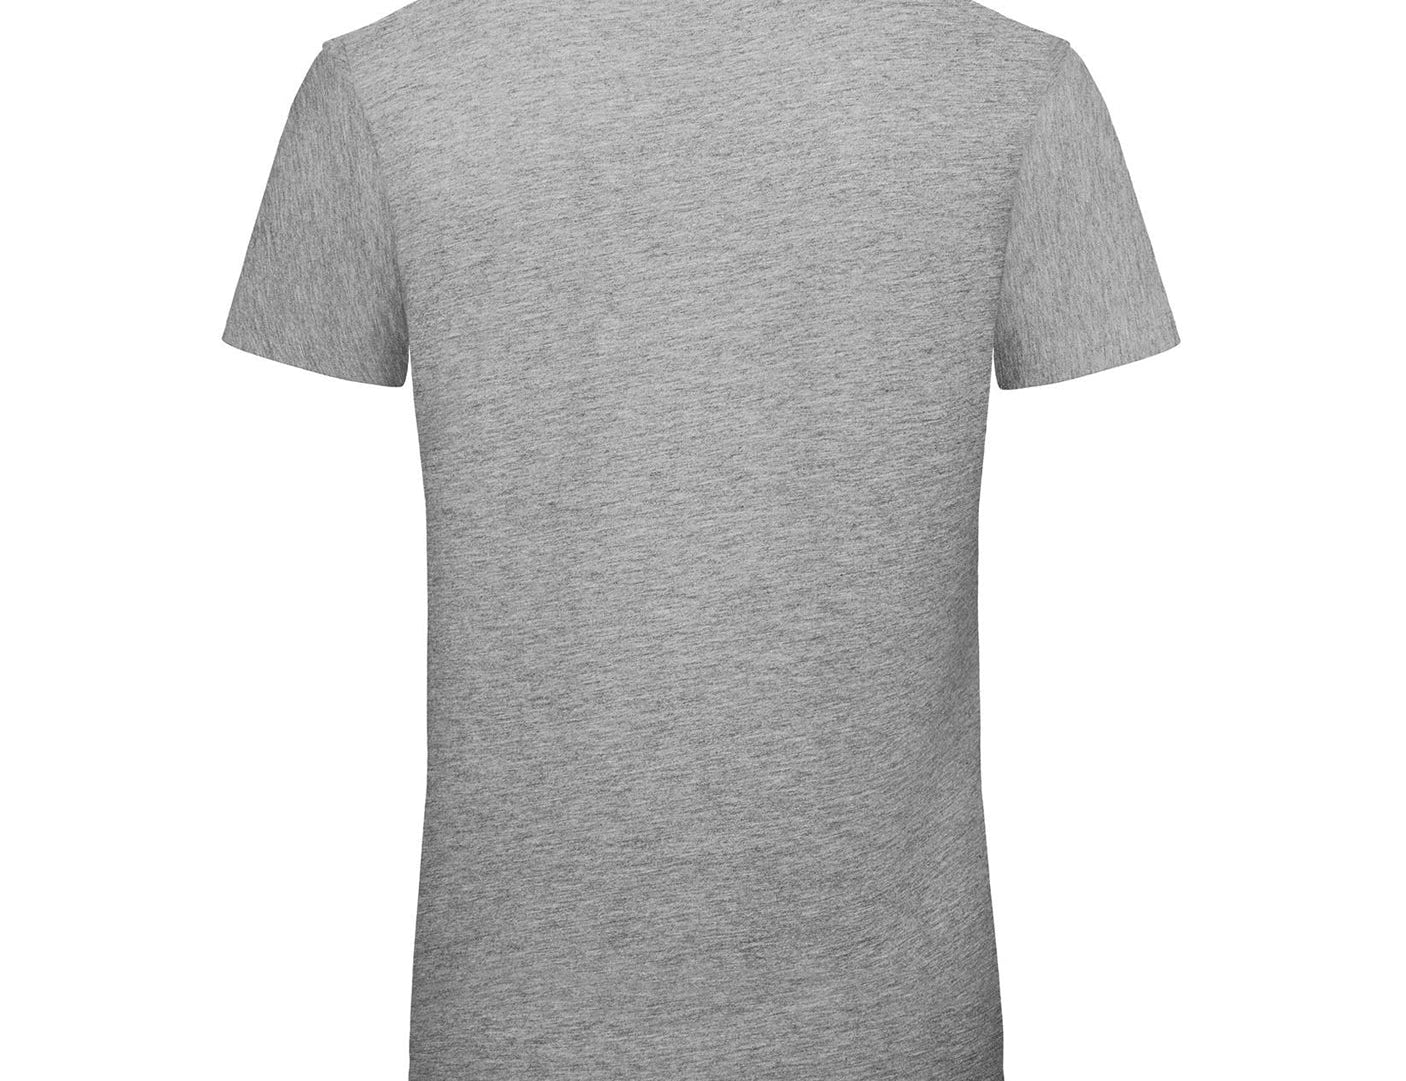 T-shirt in Heather Grey - ONETURTLE